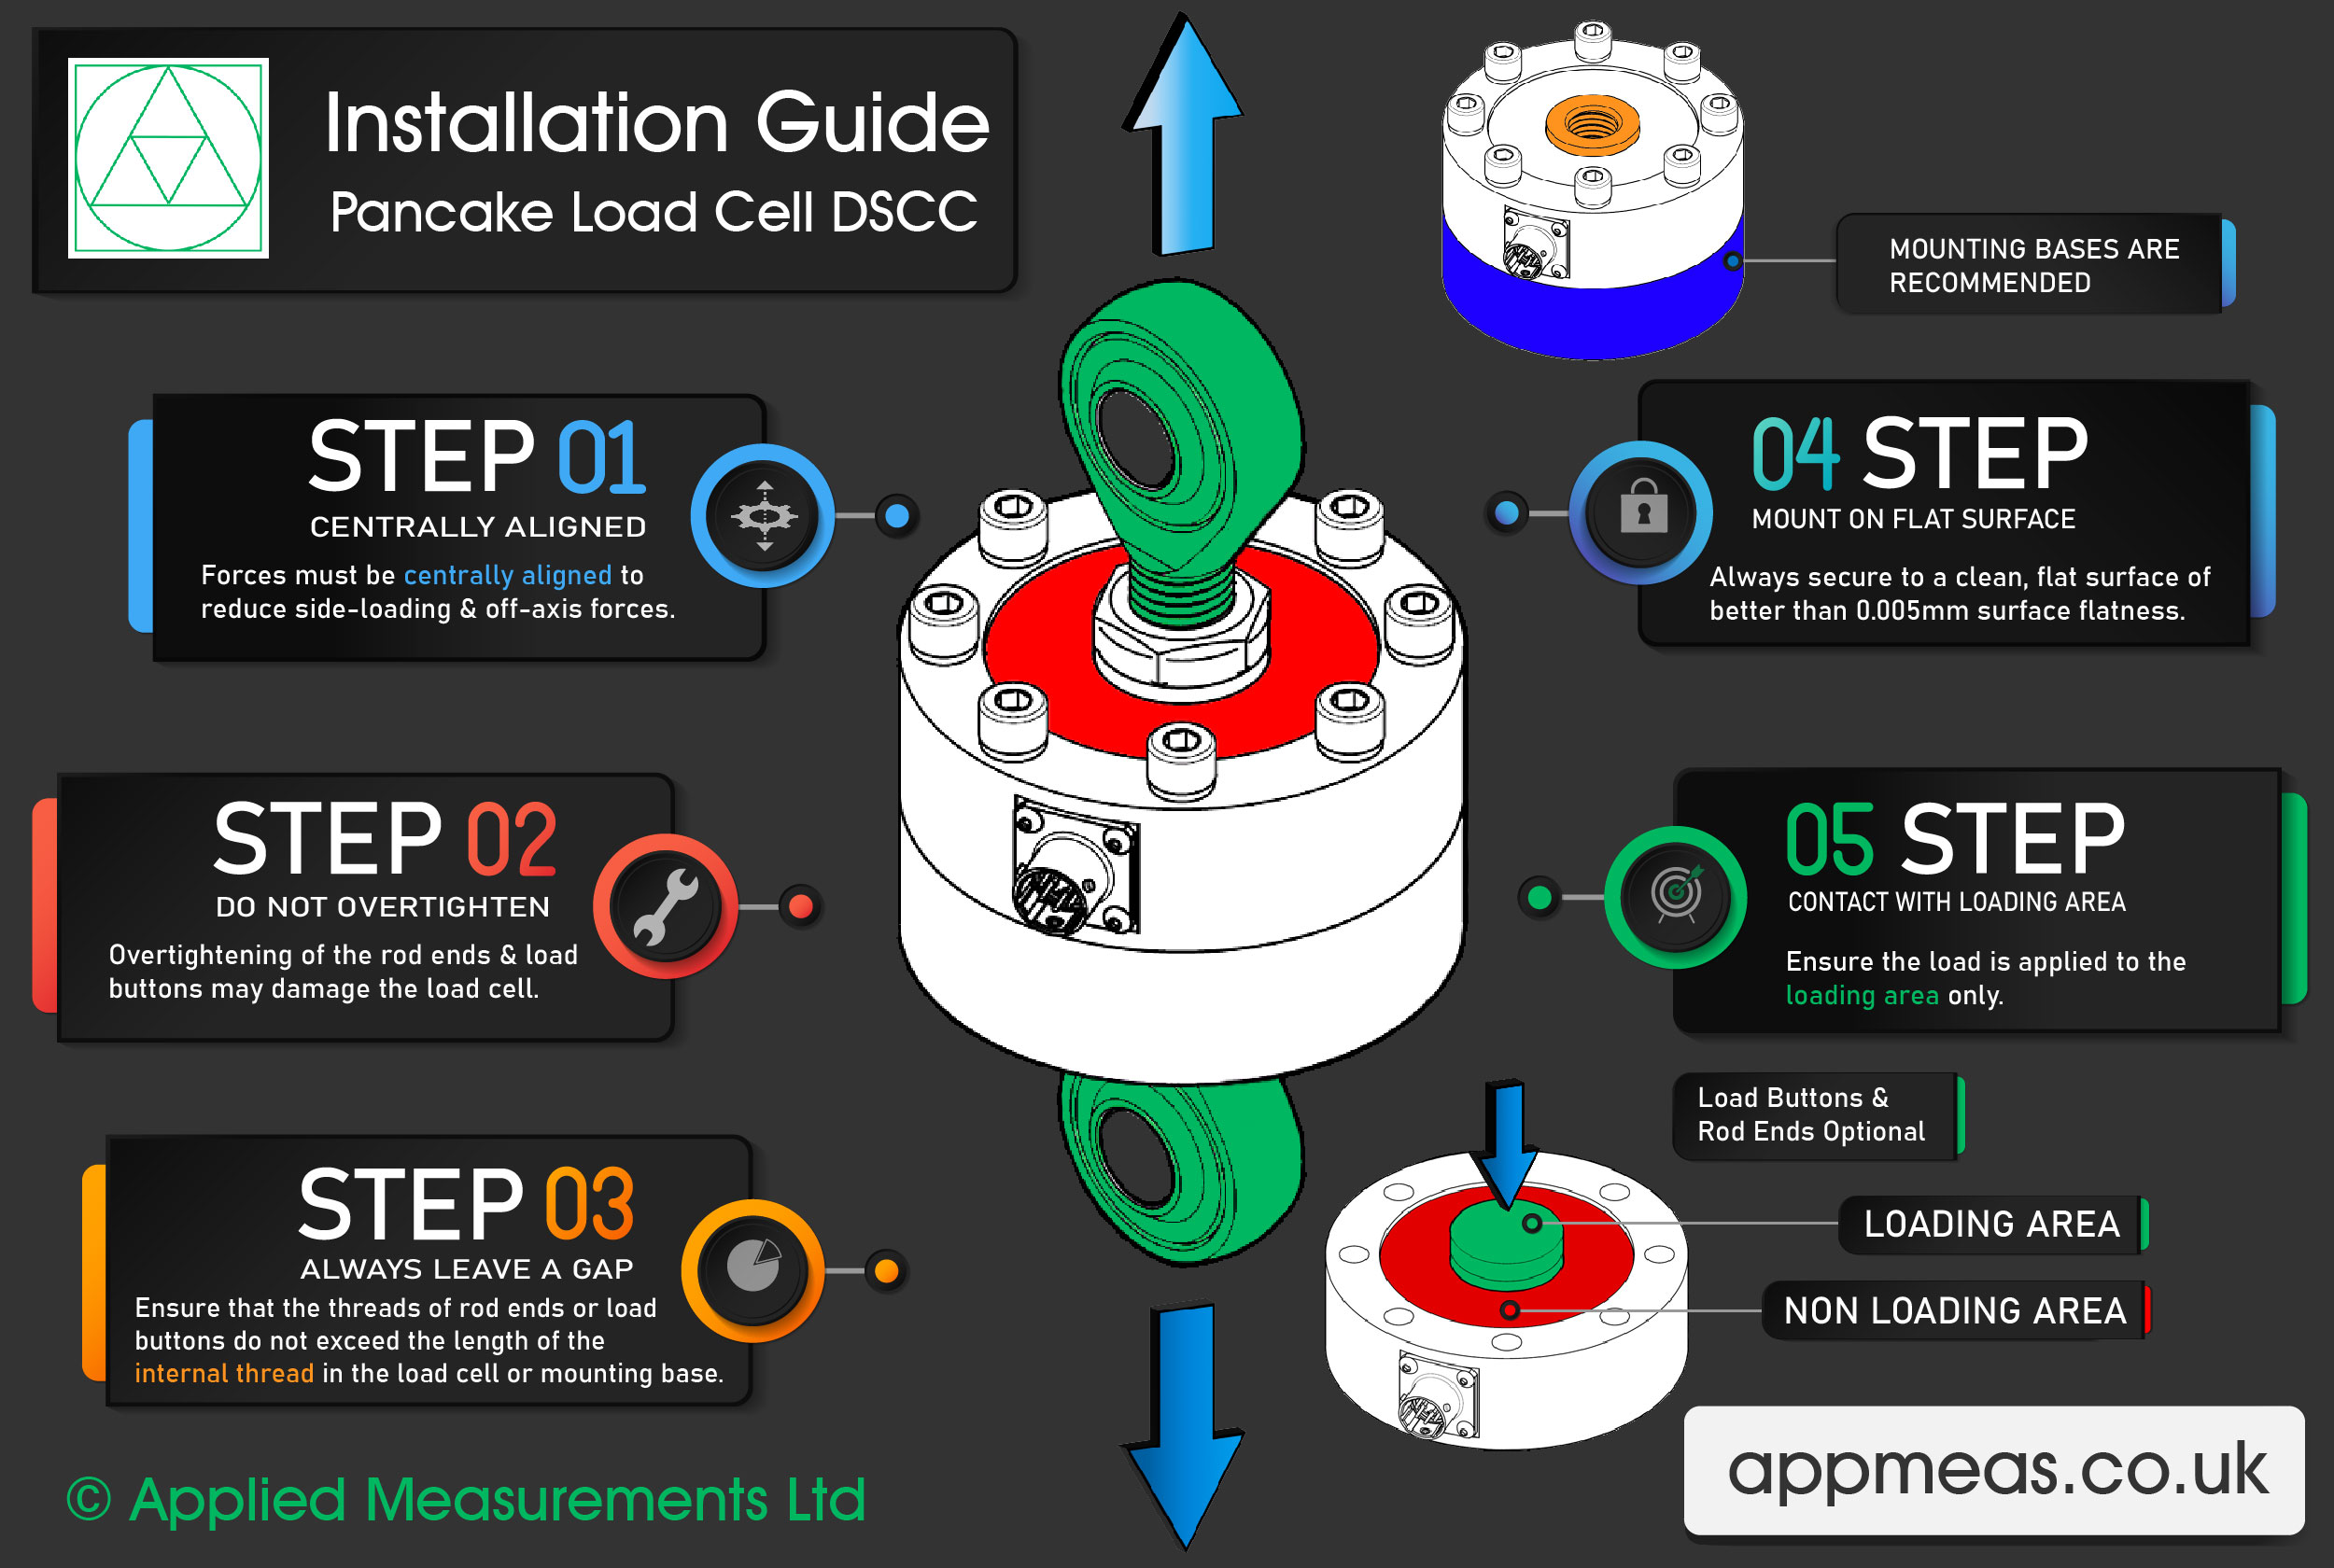 Pancake load cell infographic installation guide on how to install an pancake load cell